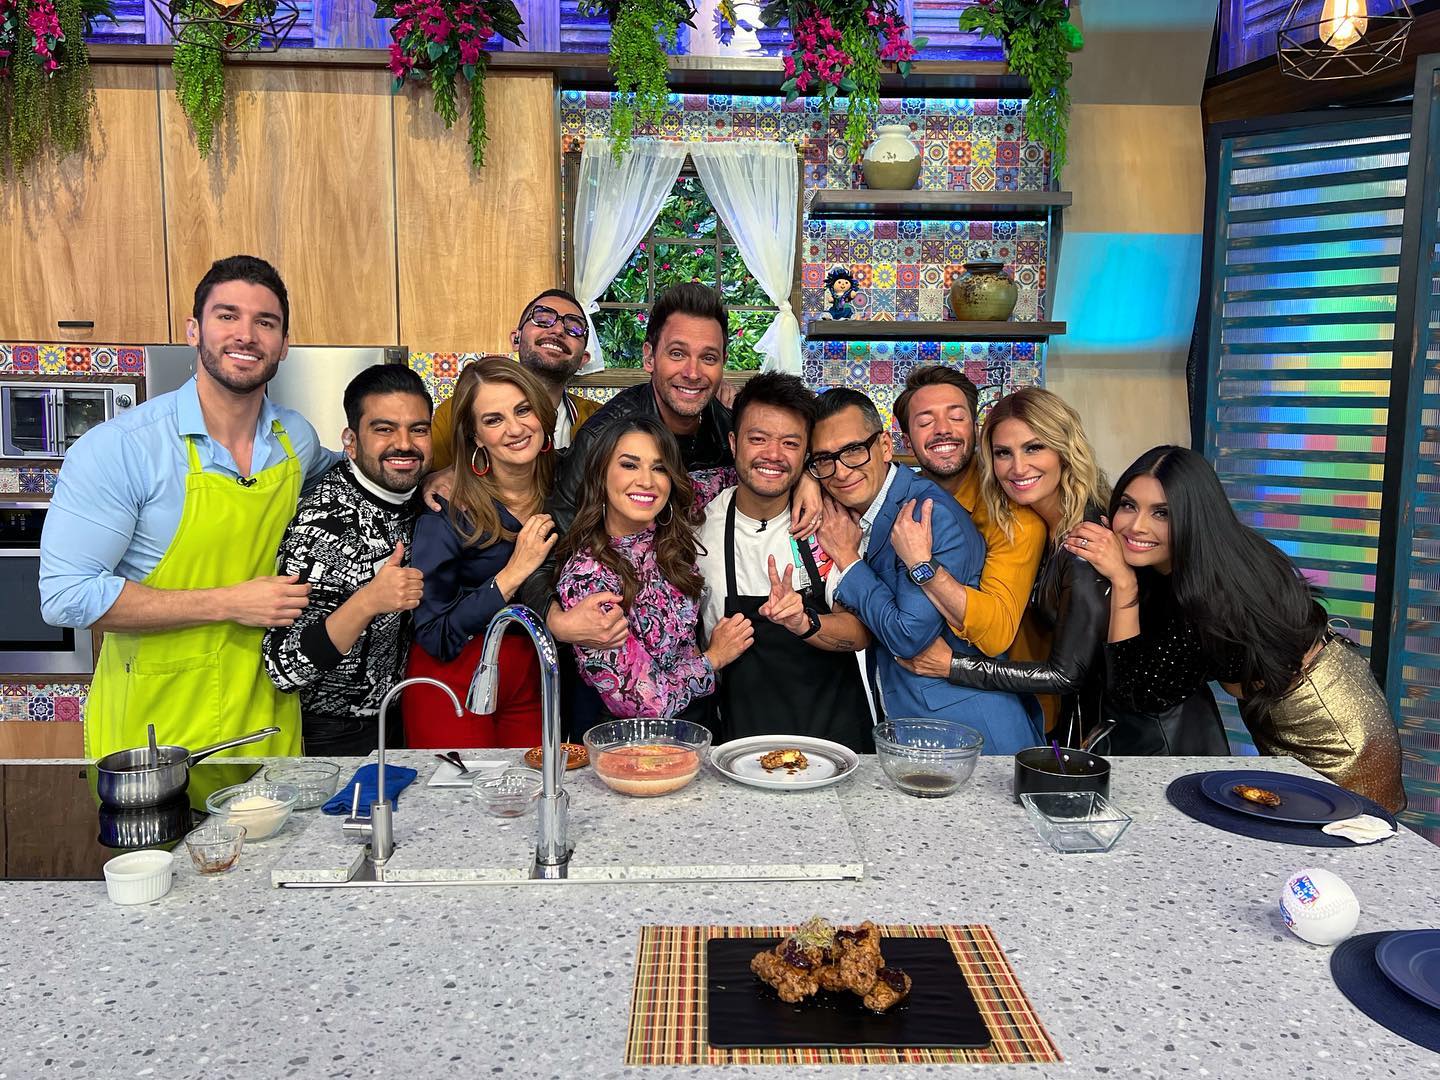 Users of social networks pointed out that Venga la Alegría invited Norma Lizbeth's family to obtain more ratings (Facebook/vengalalegria)